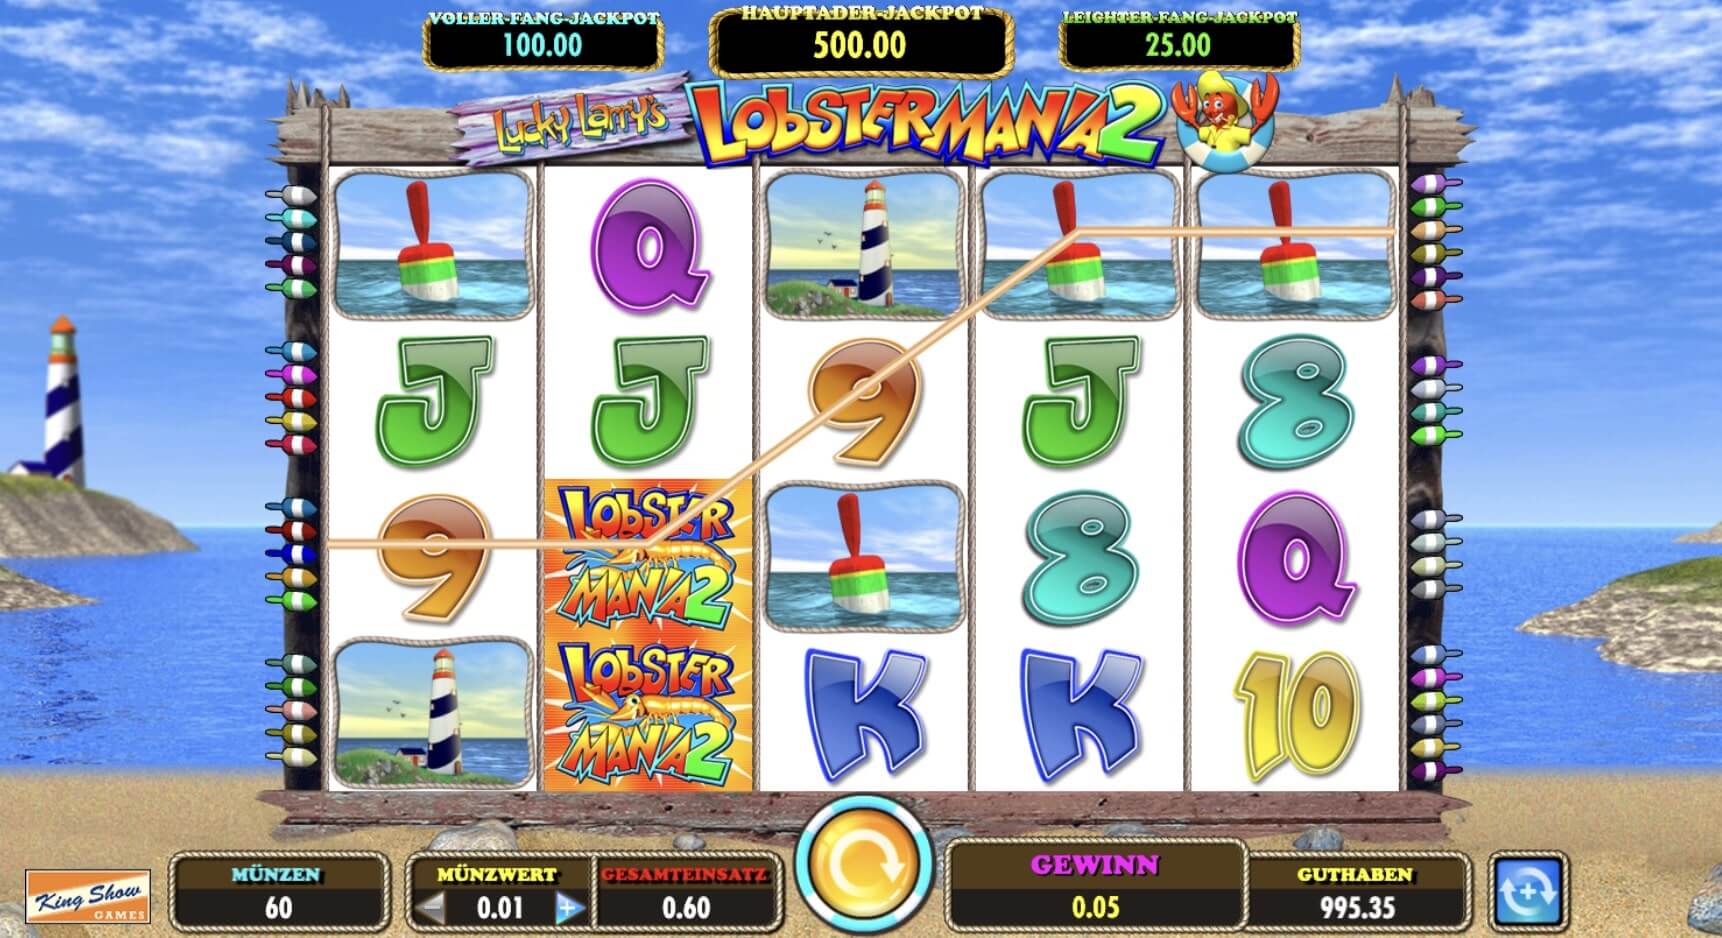 Lobstermania 2 Slot by IGT